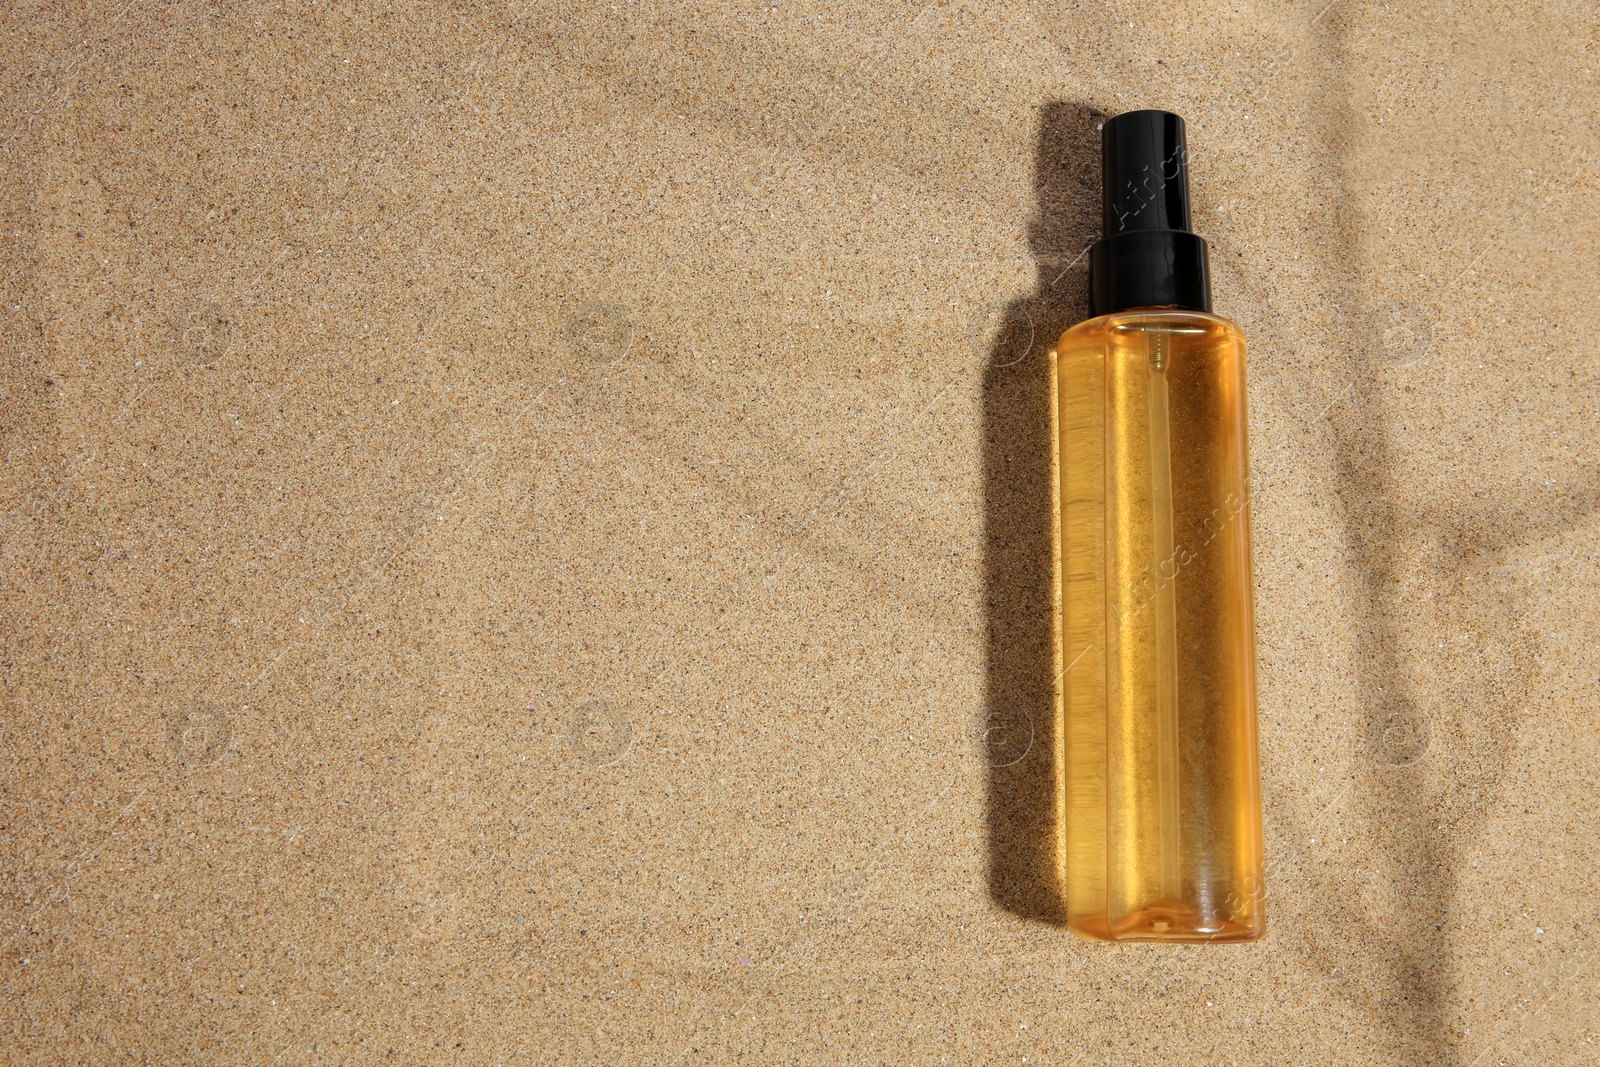 Photo of Bottle with serum on sand, top view and space for text. Cosmetic product